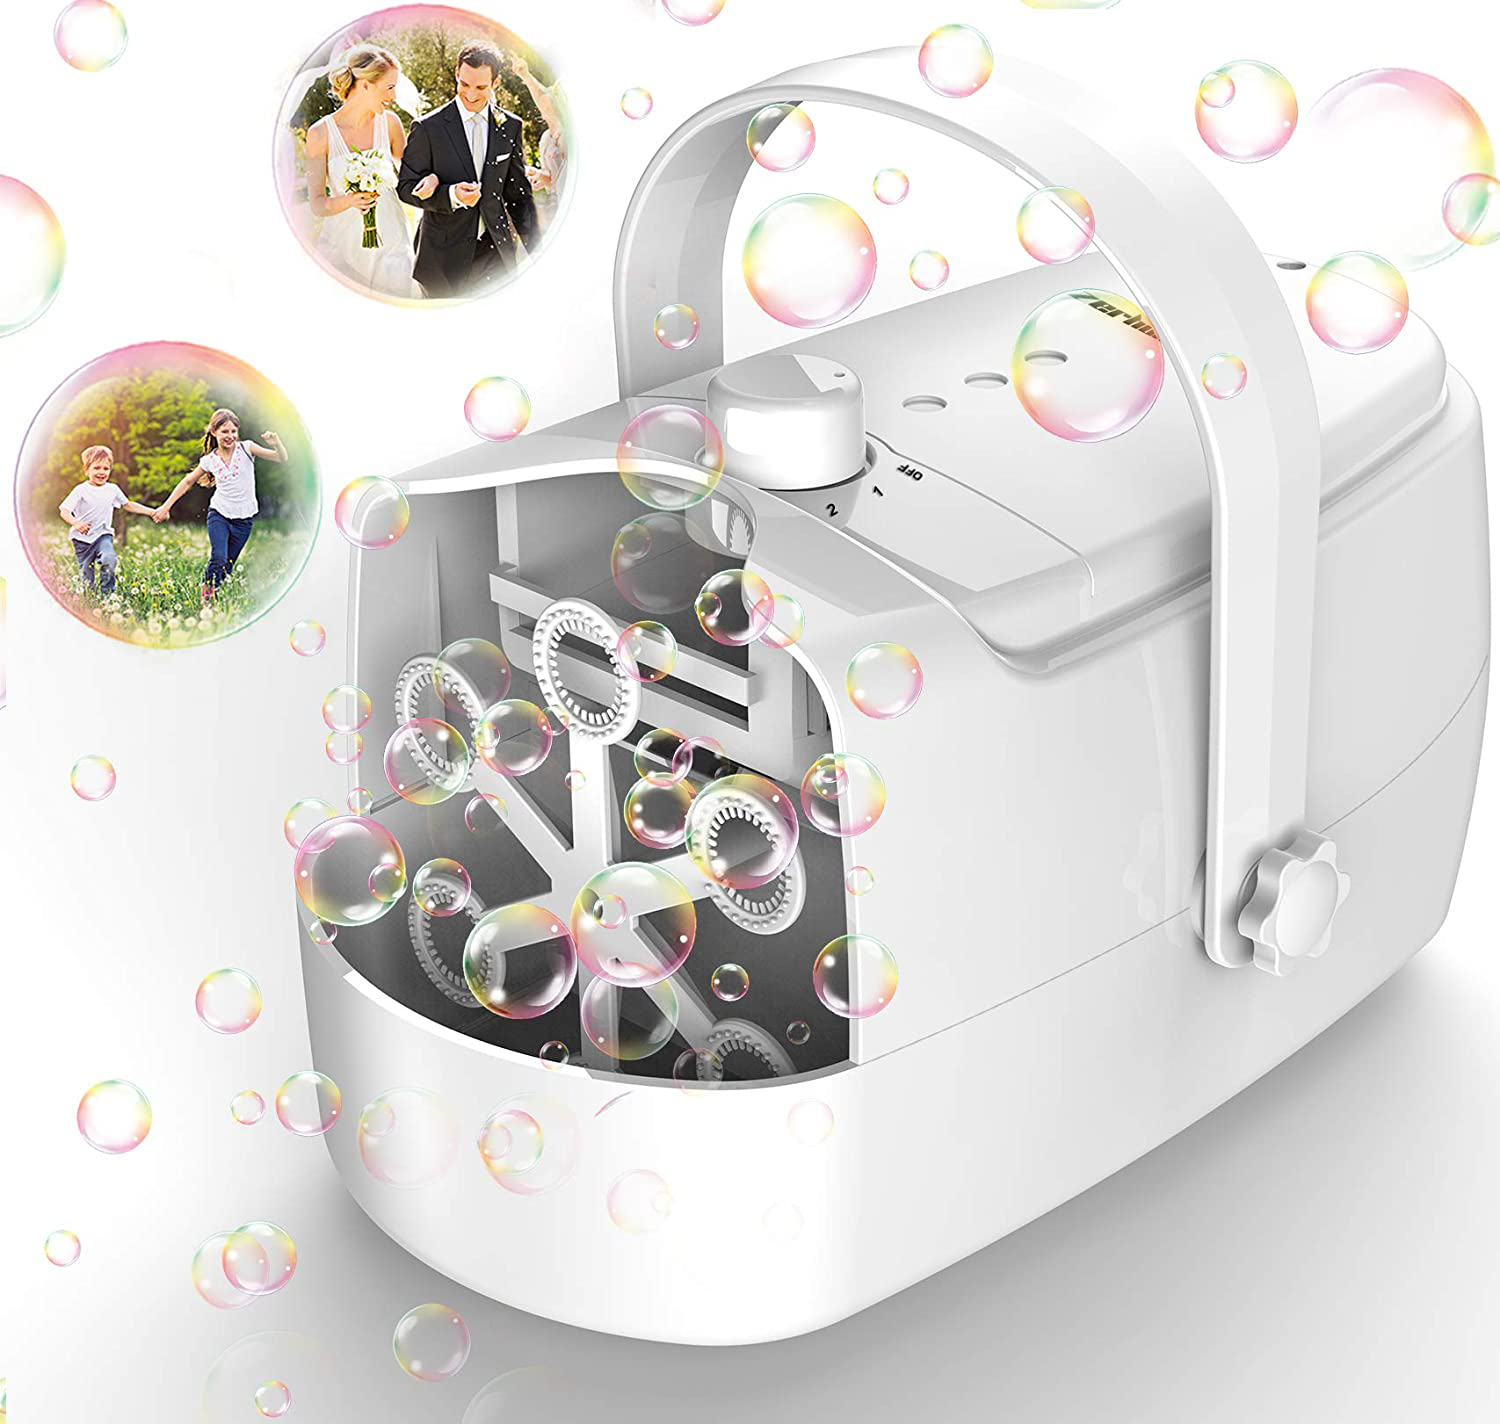 Bubble Machine Durable Automatic Bubble Blower, 4800+ Bubbles Per Minute Bubbles for Kids Toddlers Bubble Maker Operated by Plugin or Batteries Bubble Toys for Indoor Outdoor Birthday Party